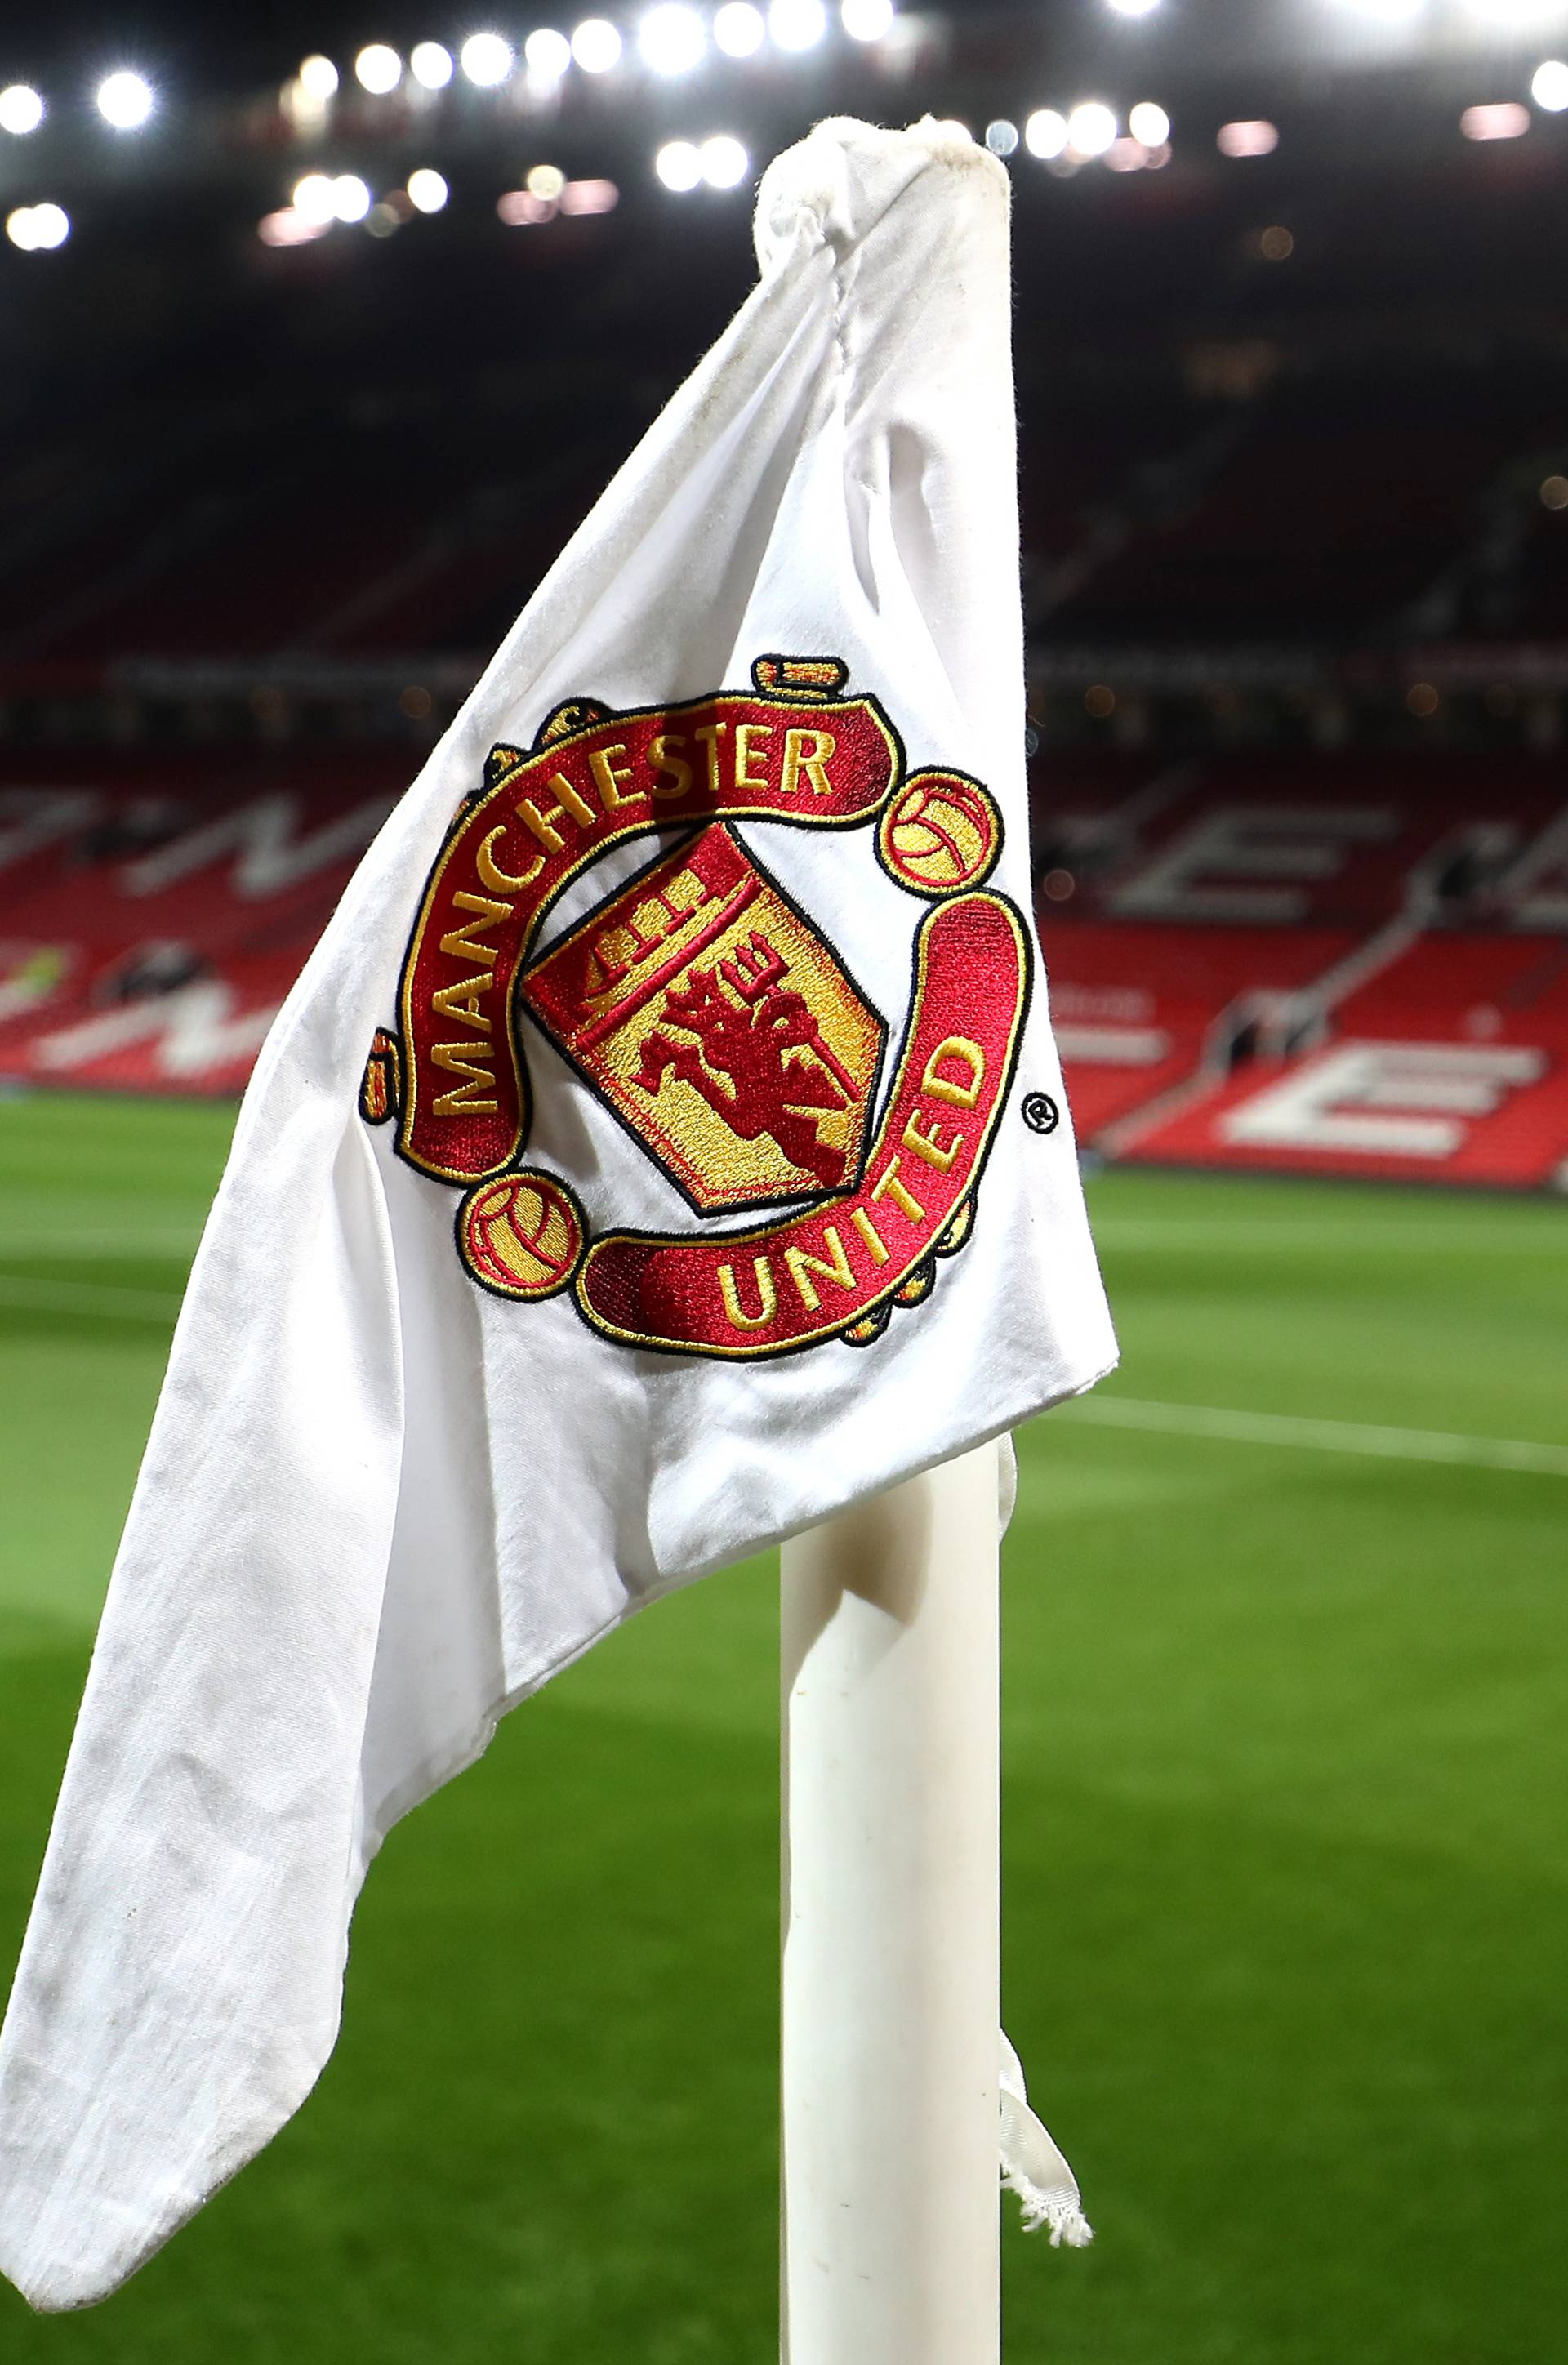 Manchester United v Derby County - FA Cup - Third Round - Old Trafford